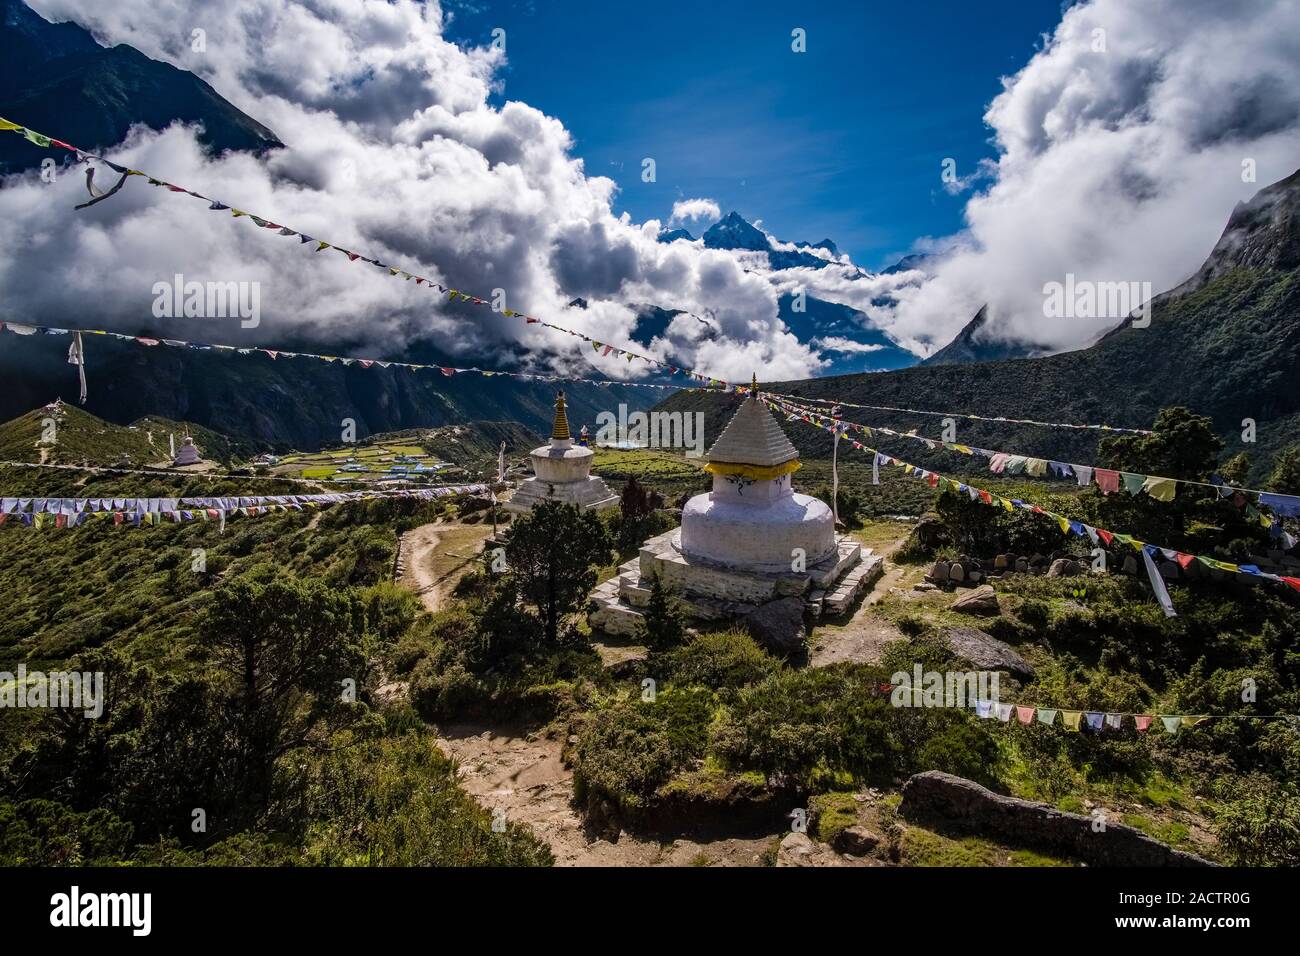 Buddhist stupas on a mountain slope above town, Mt. Thamserku covered in monsoon clouds in the distance Stock Photo